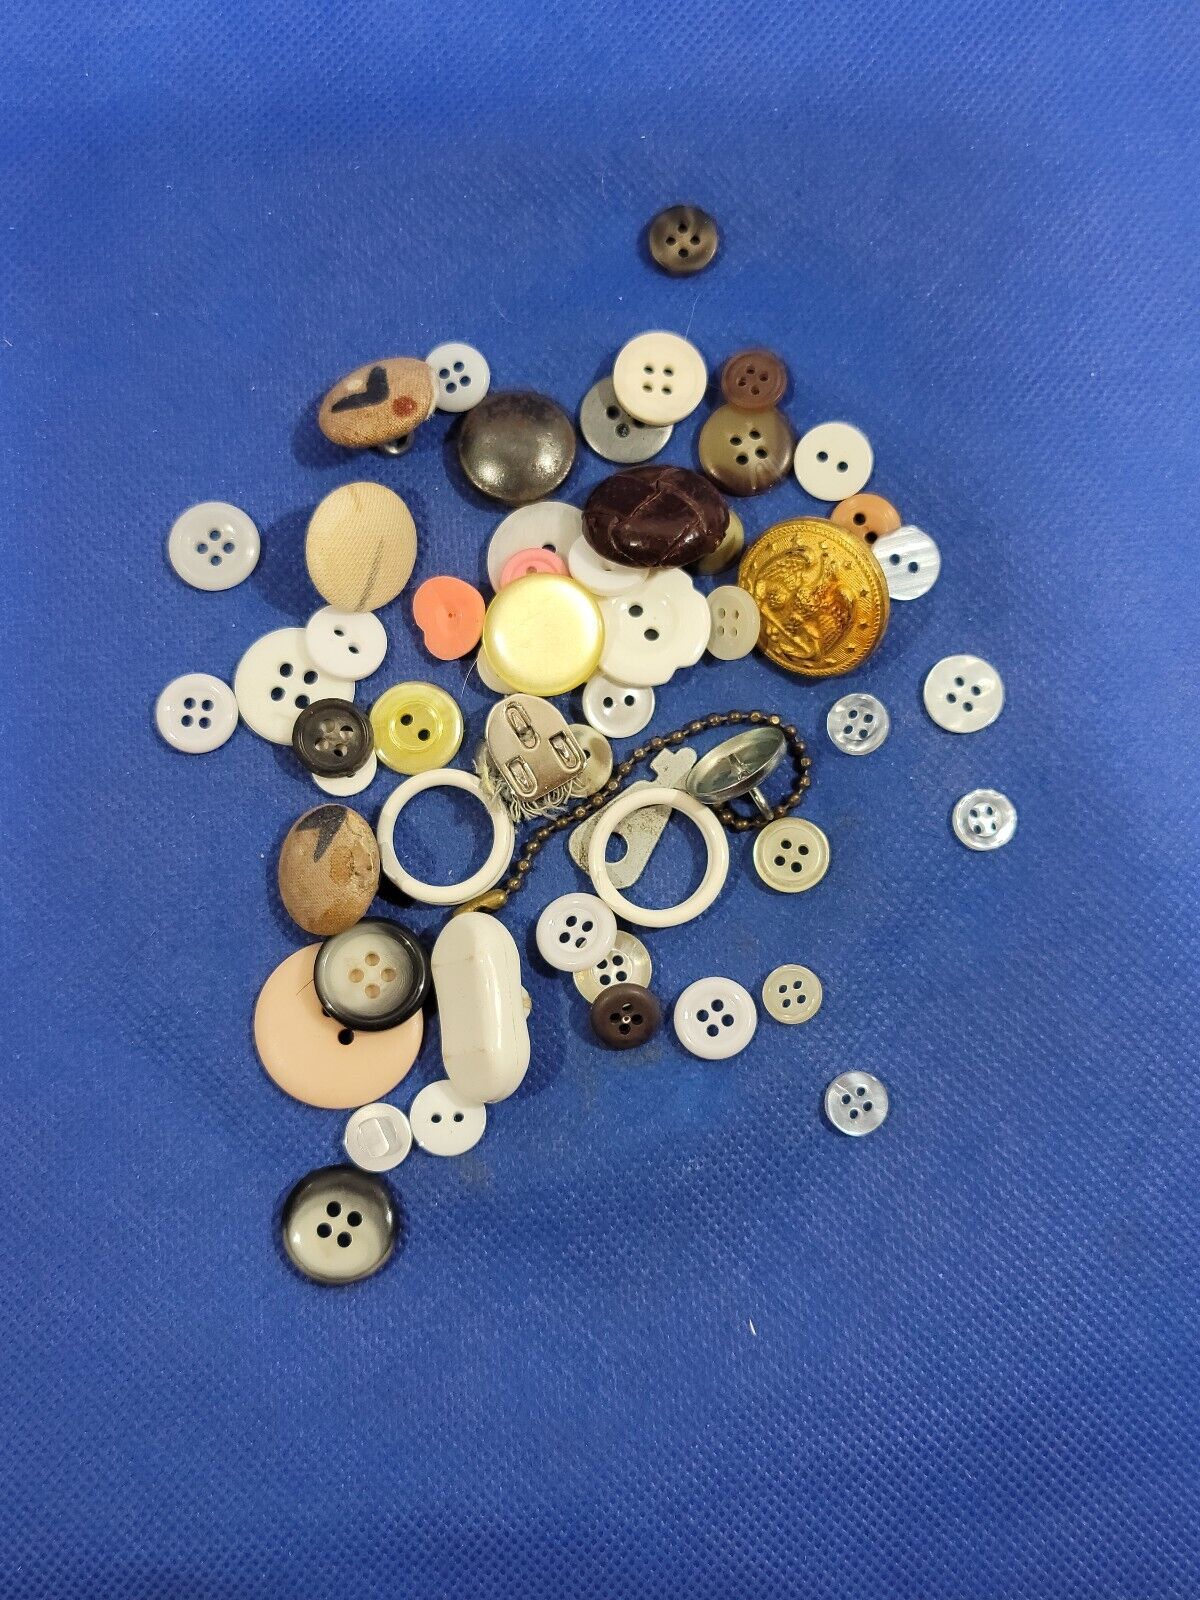 Vintage Button Estate mixed Hobby Crafts Buttons Lot 50+